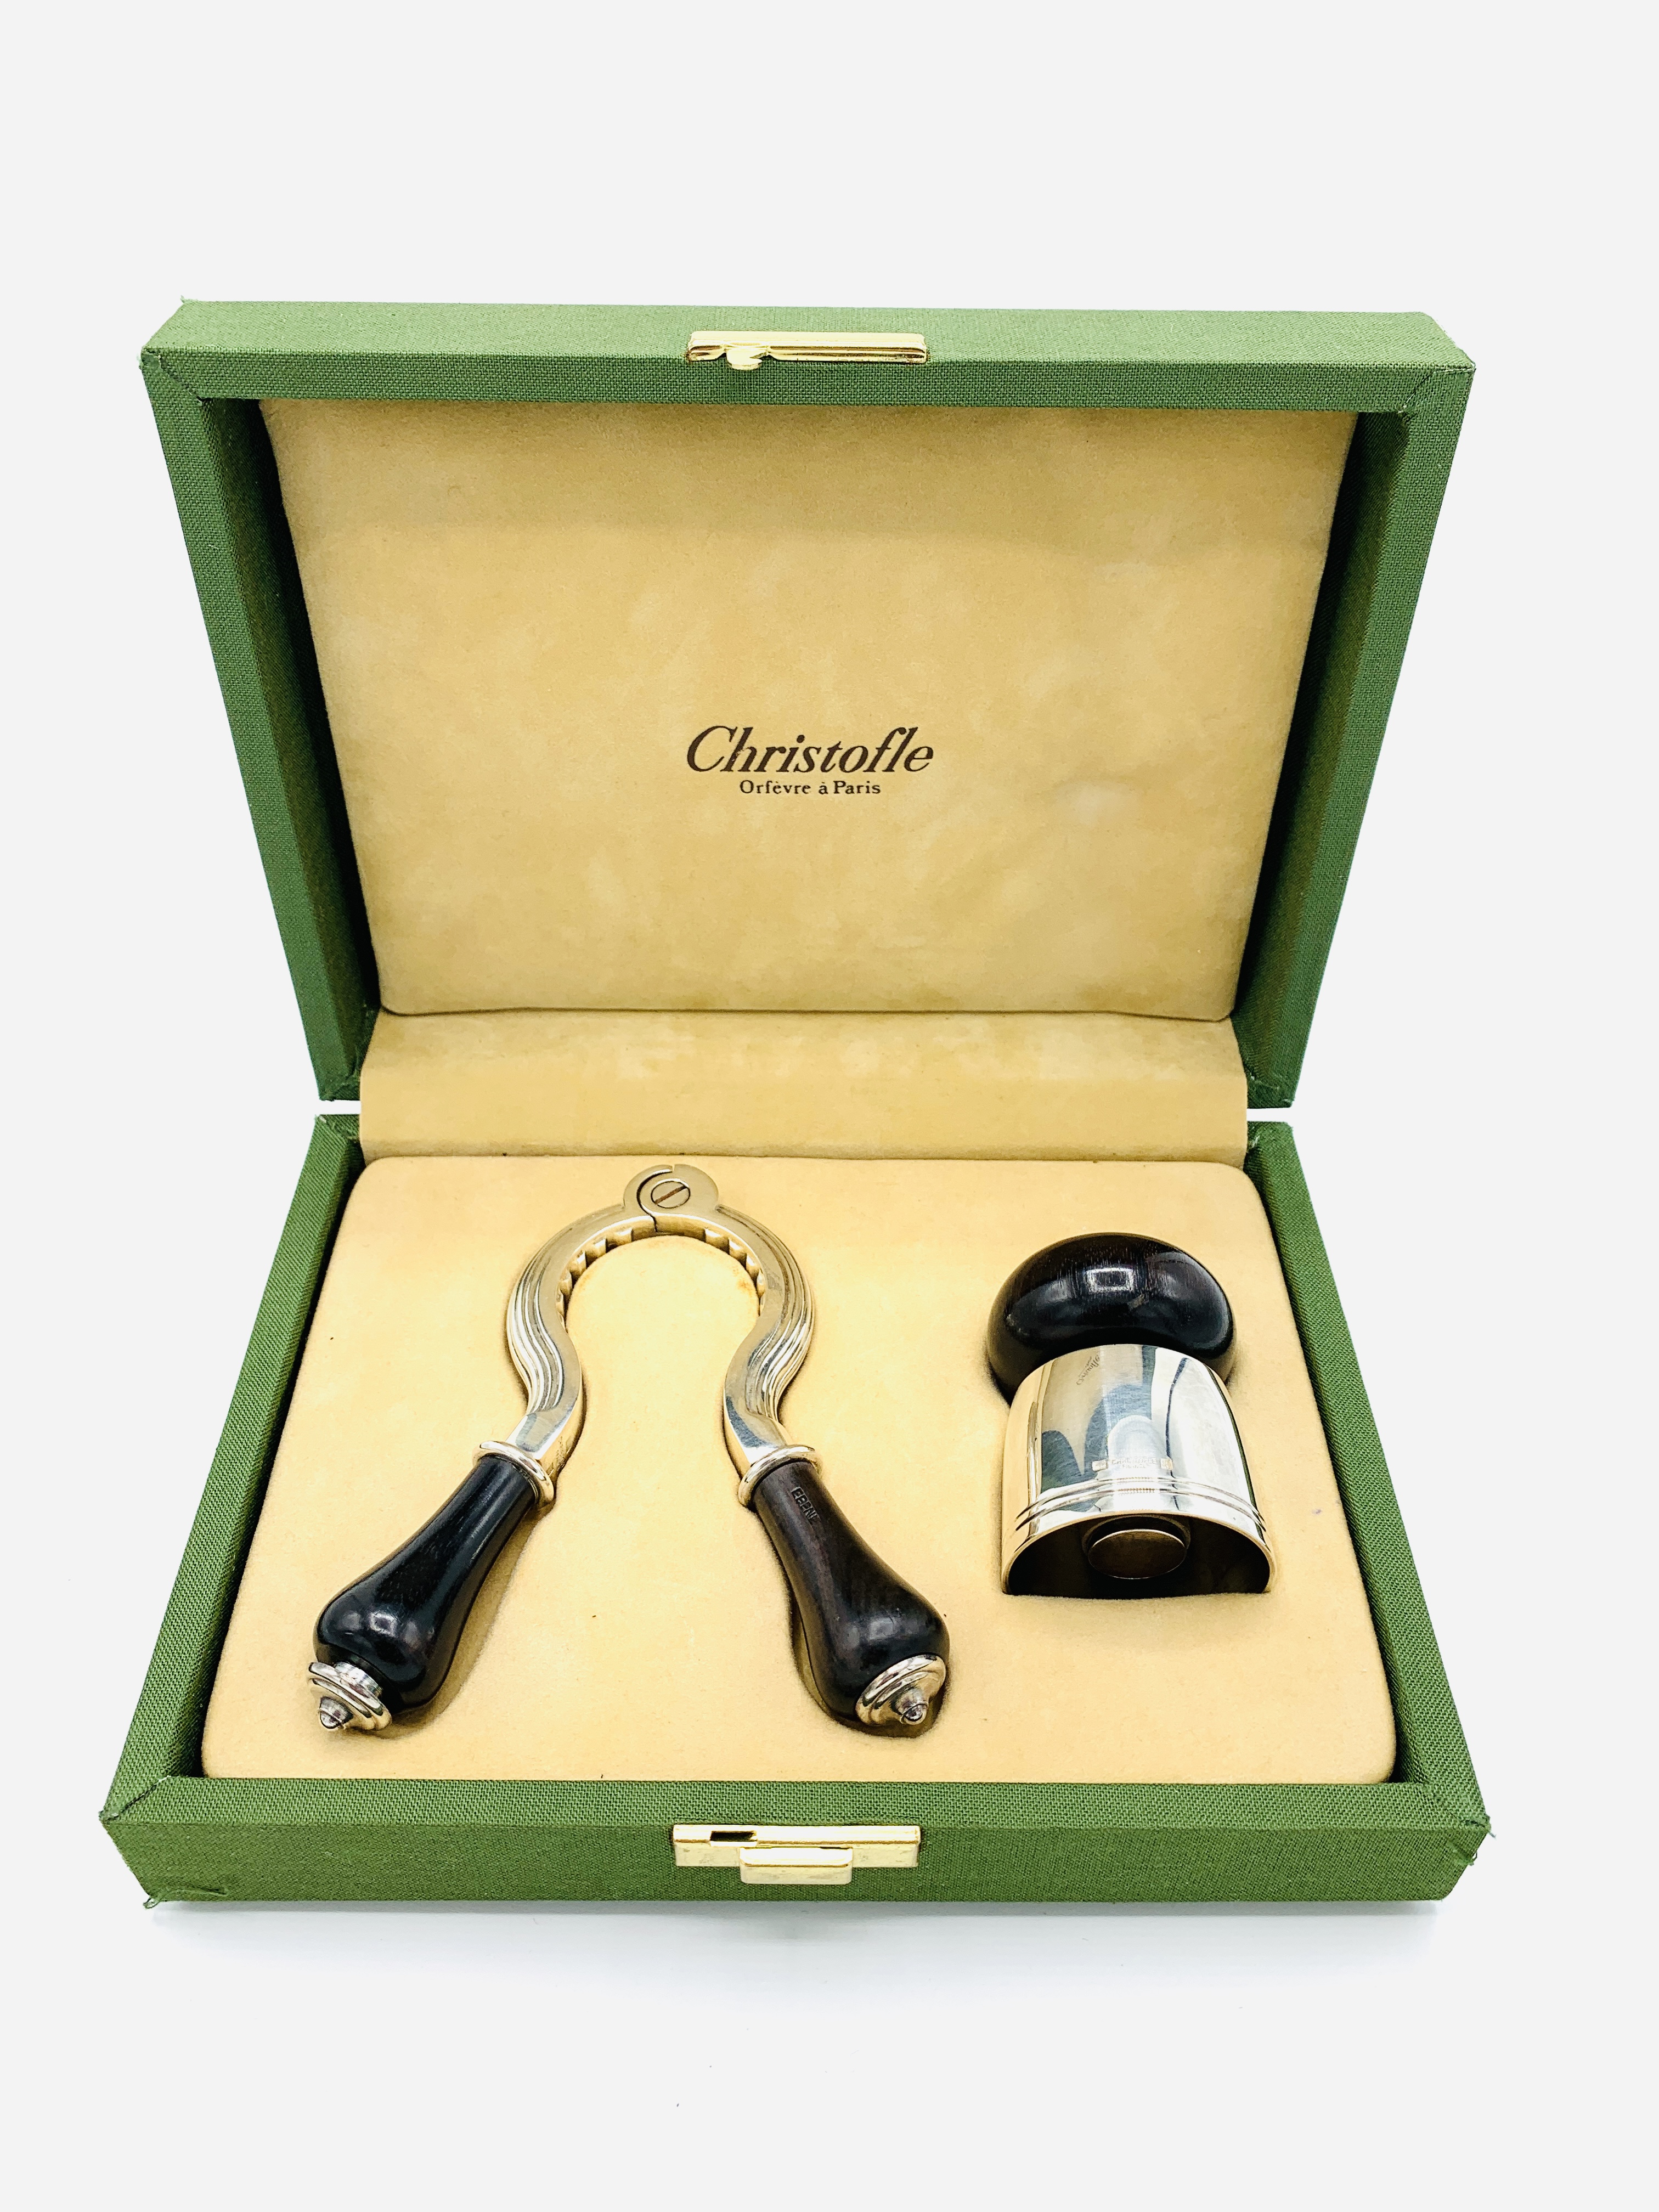 Christofle boxed champagne opener and bottle stopper. - Image 3 of 3